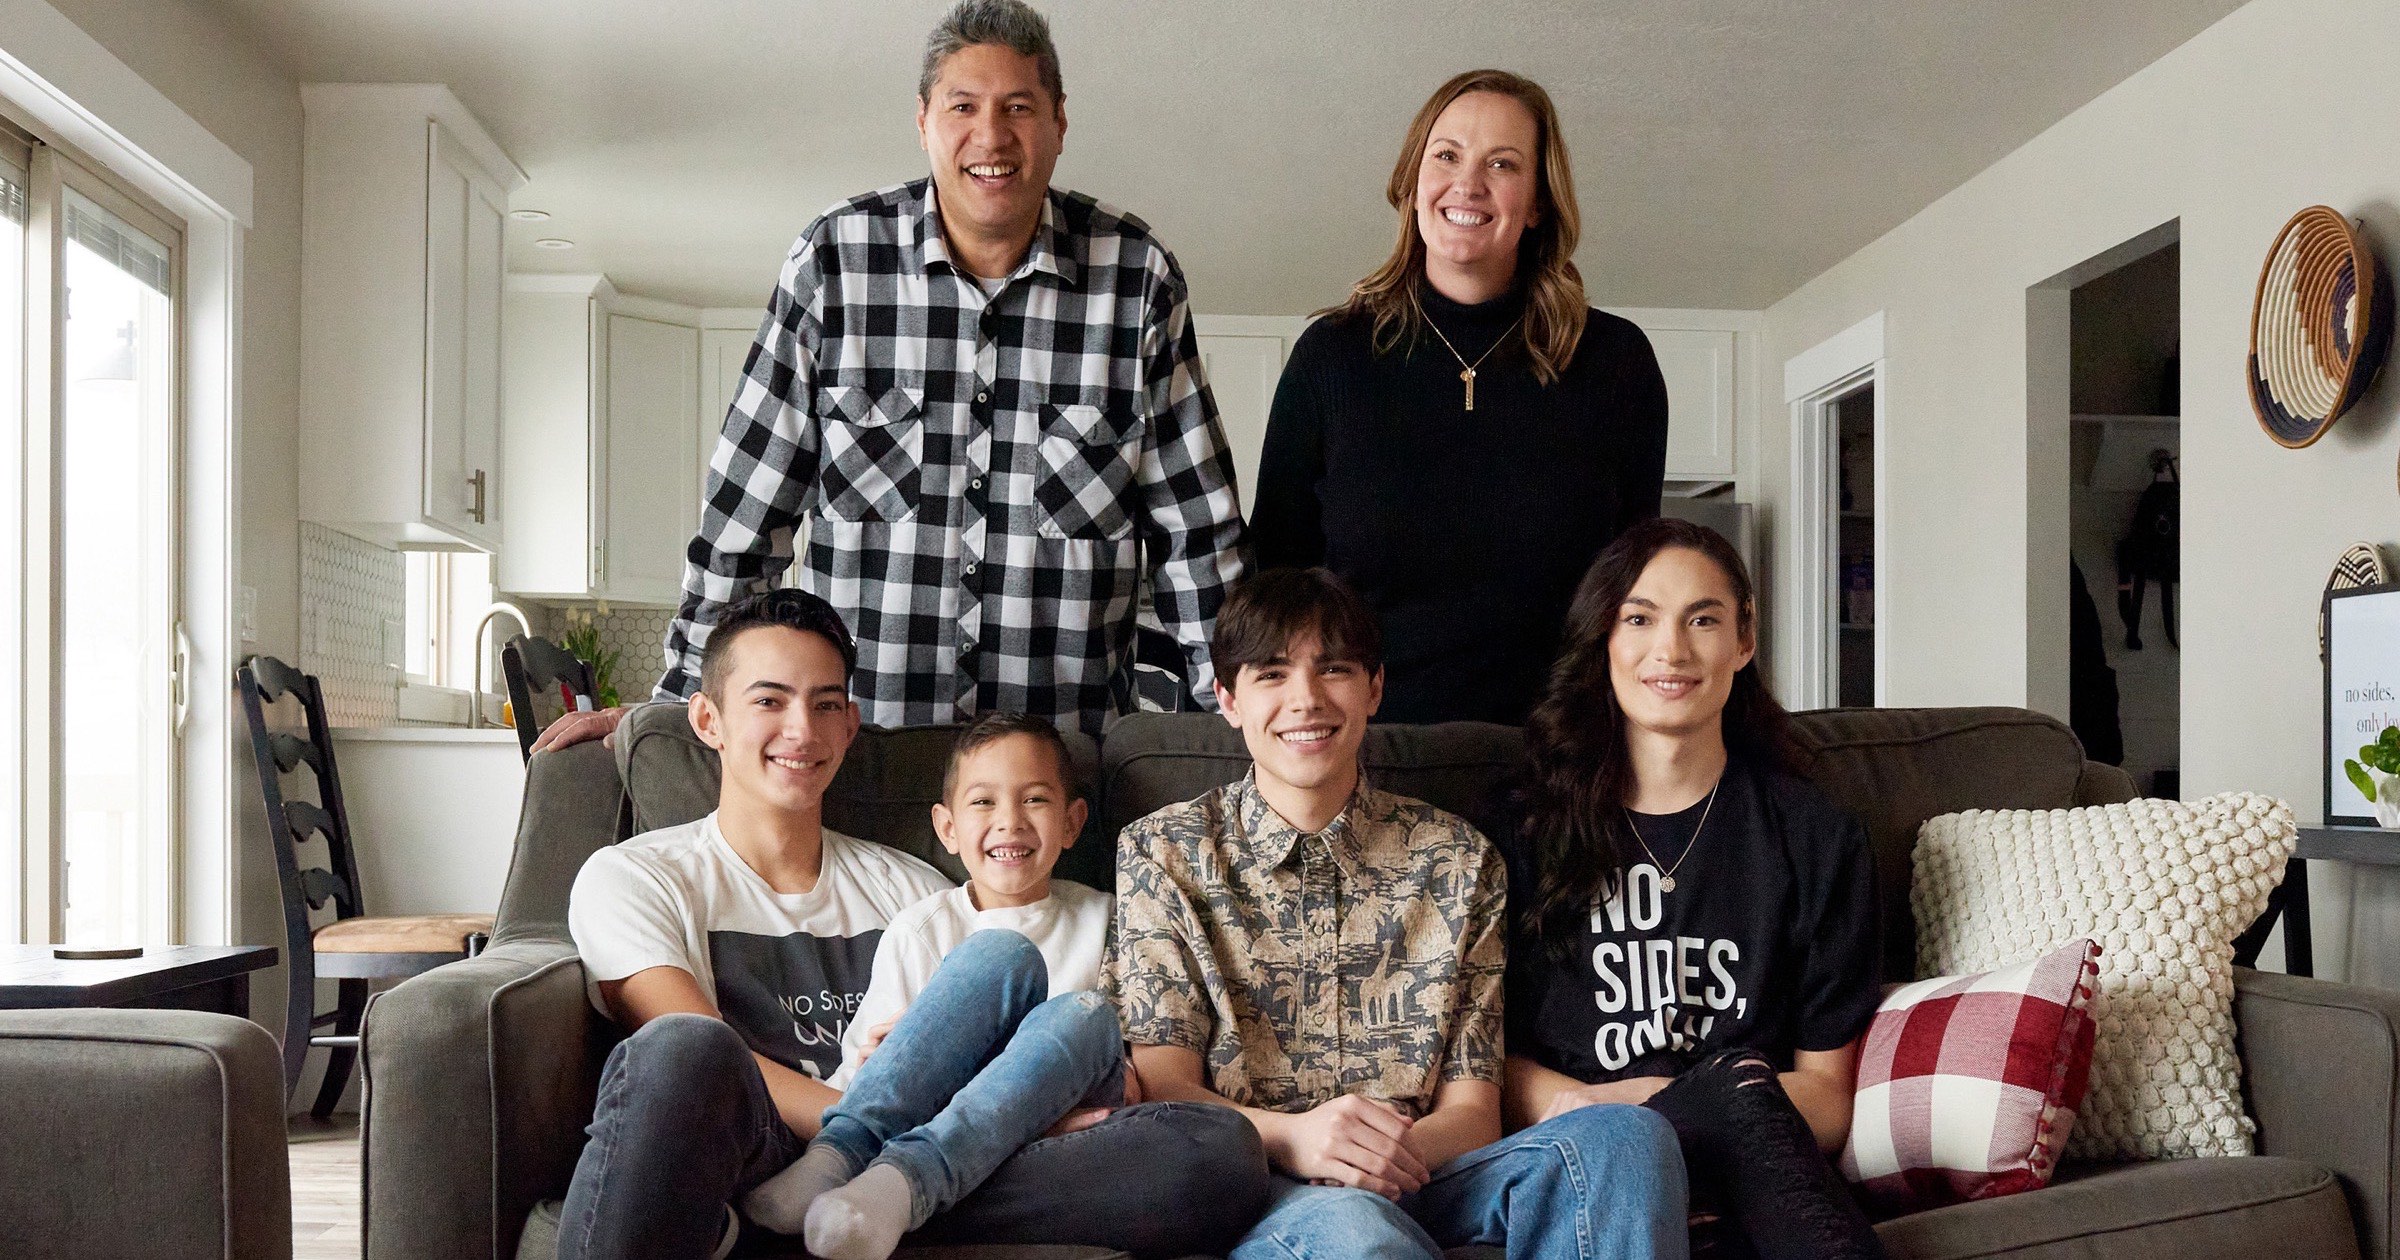 Encircle, a local nonprofit that serves young LGBTQ+ people and their families